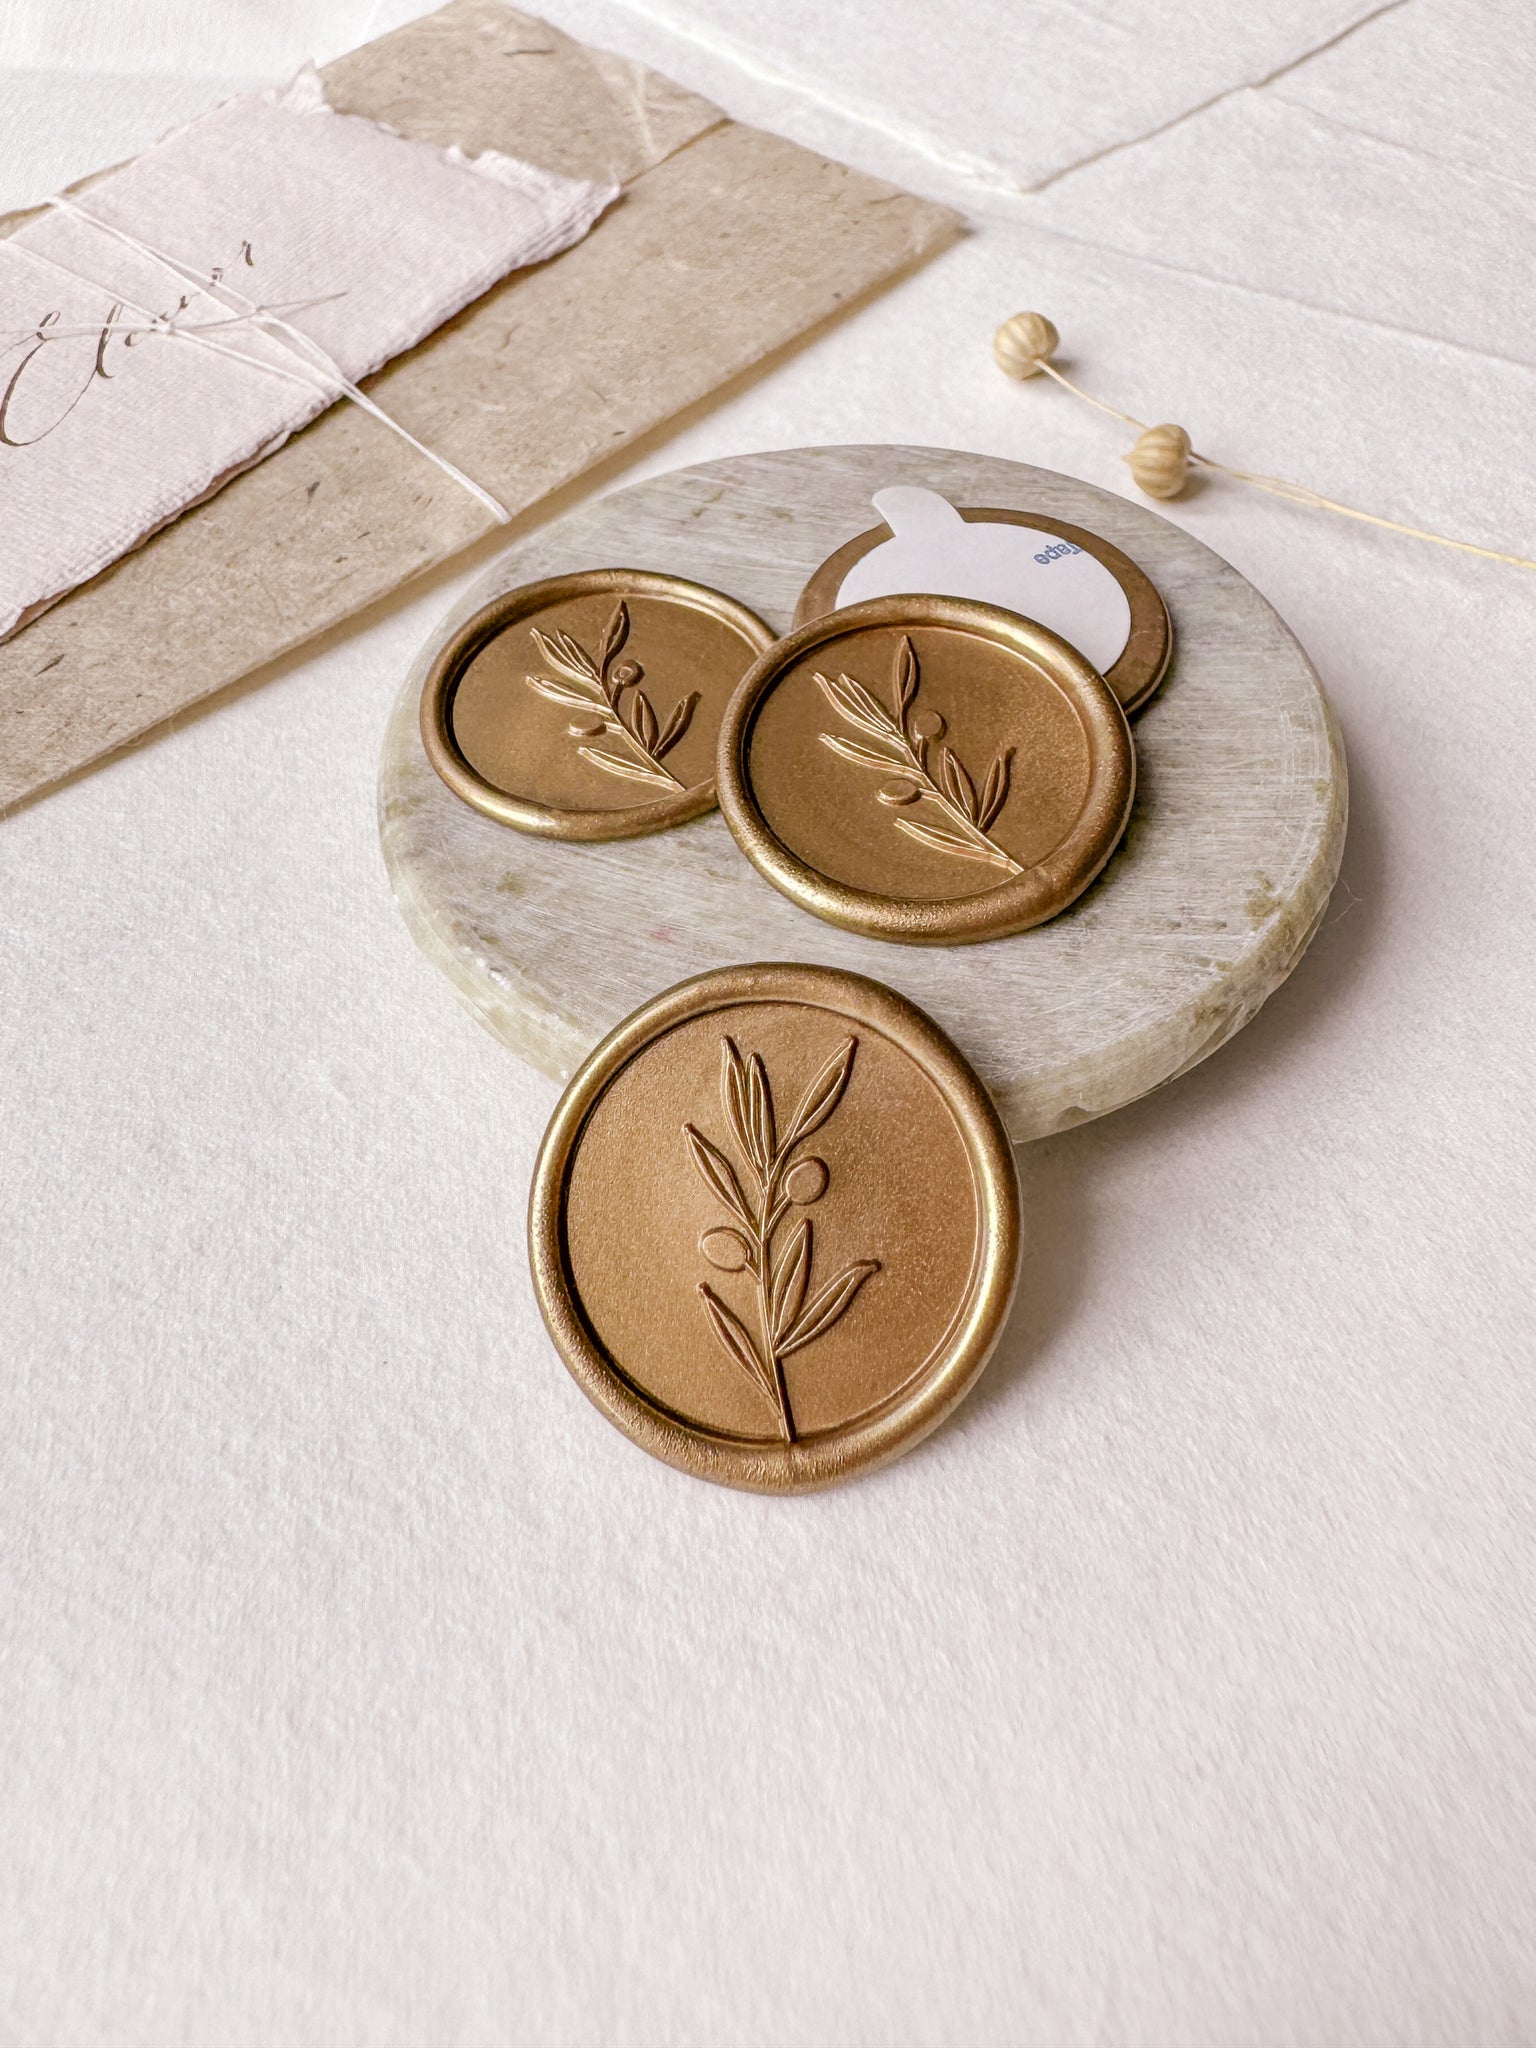 Olive branch gold wax seals styled with a small gray stone dish, handmade paper and a dried floral branch